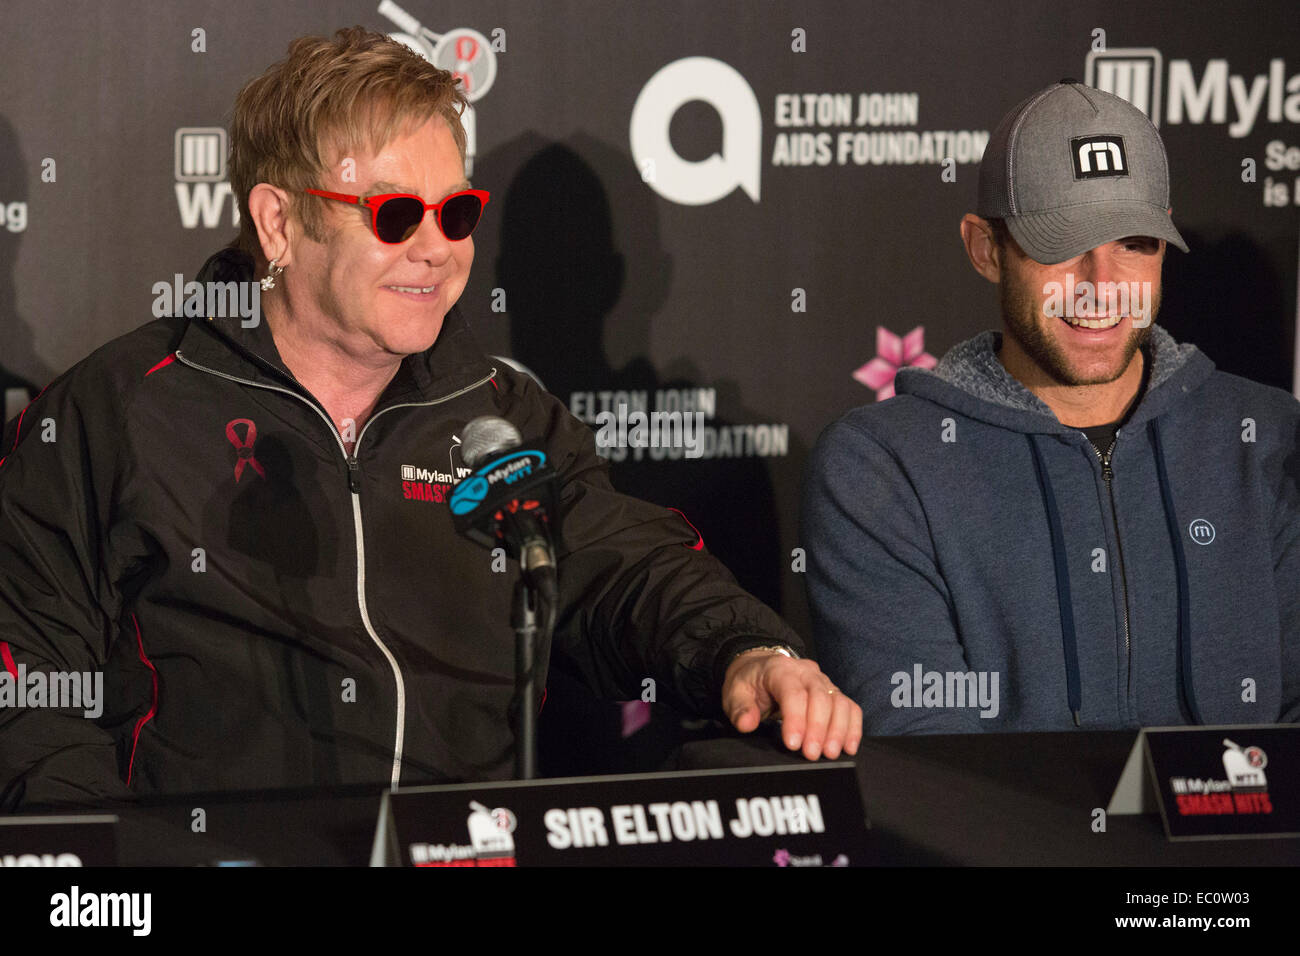 London, UK. 7 December 2014. Sir Elton John and Andy Roddick. Press conference led by Billie Jean King and Sir Elton John ahead of the tennis matches of the 22nd Mylan World Team Tennis Smash Hits at the Royal Albert Hall, London. Event participants include Andy Roddick, Tim Henman, Kim Clijsters, Sabine Lisicki, John McEnroe, Jamie Murray, Heather Watson and Martina Hingis. The event raises money for the Elton John Aids Foundation (EJAF). The event takes place during Statoil Masters Tennis. Credit:  Nick Savage/Alamy Live News Stock Photo